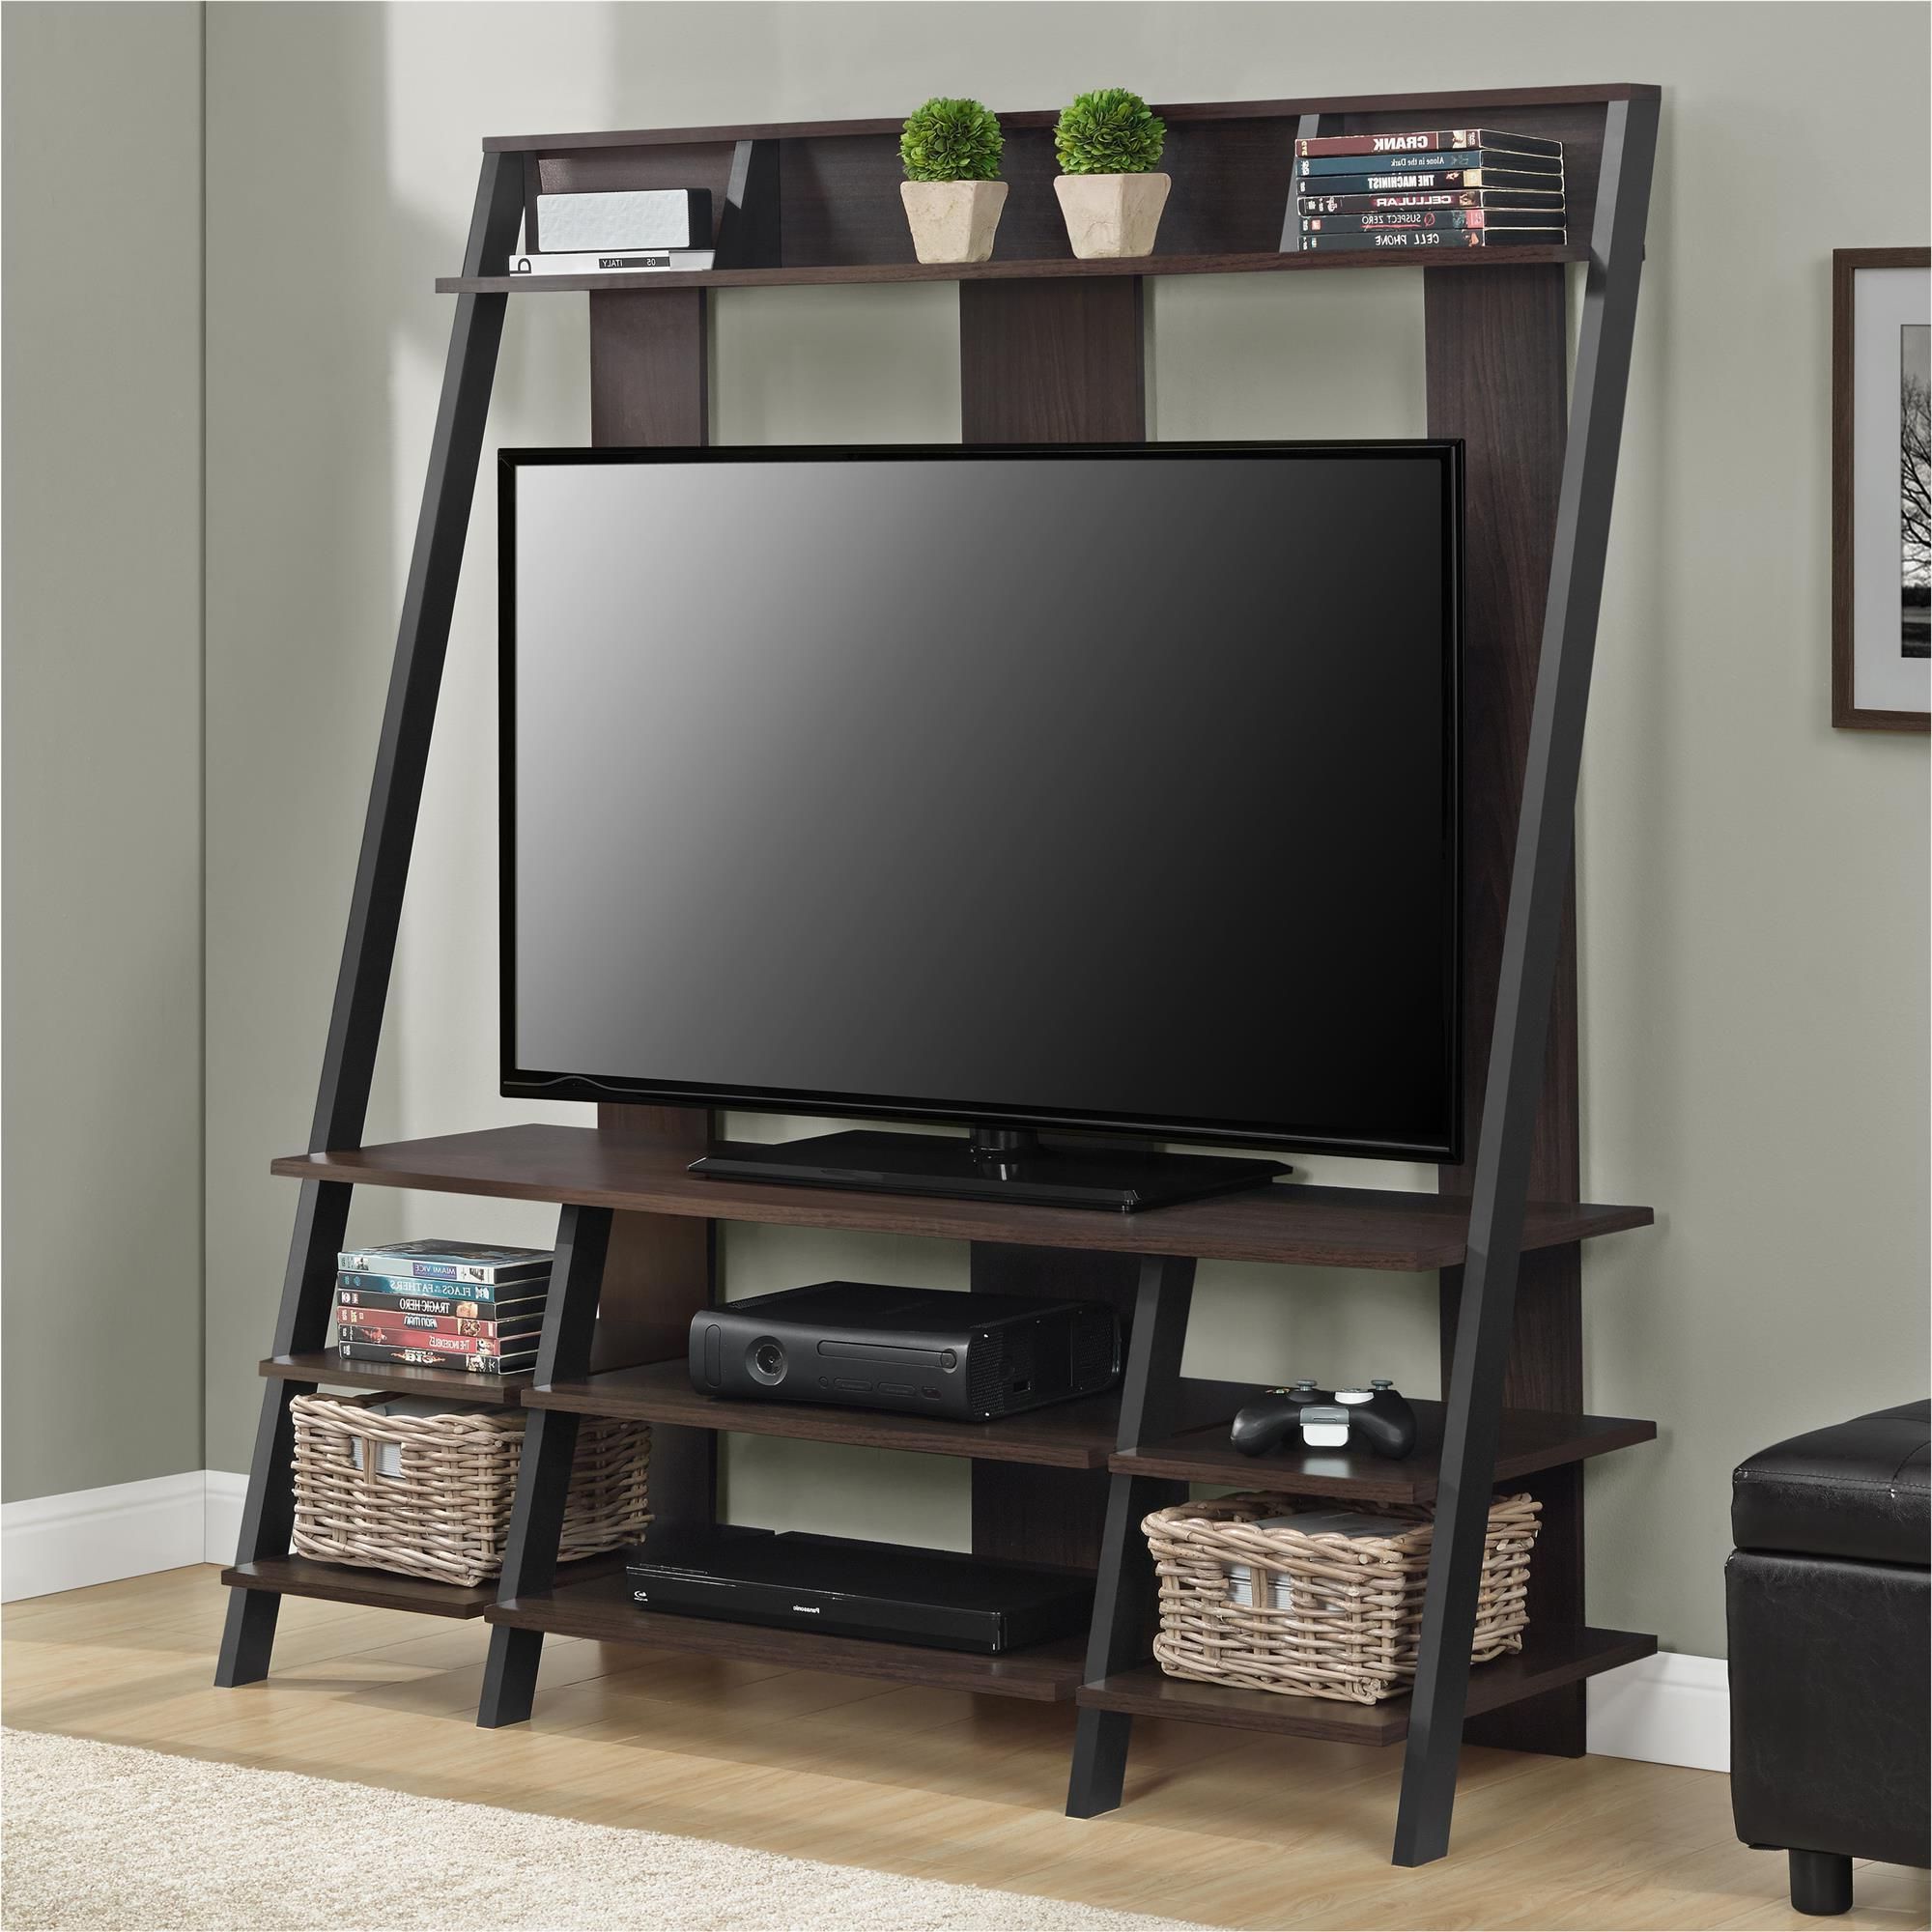 Gorgeous, Ladder Style Home Entertainment Center With With Tiva Oak Ladder Tv Stands (View 5 of 20)